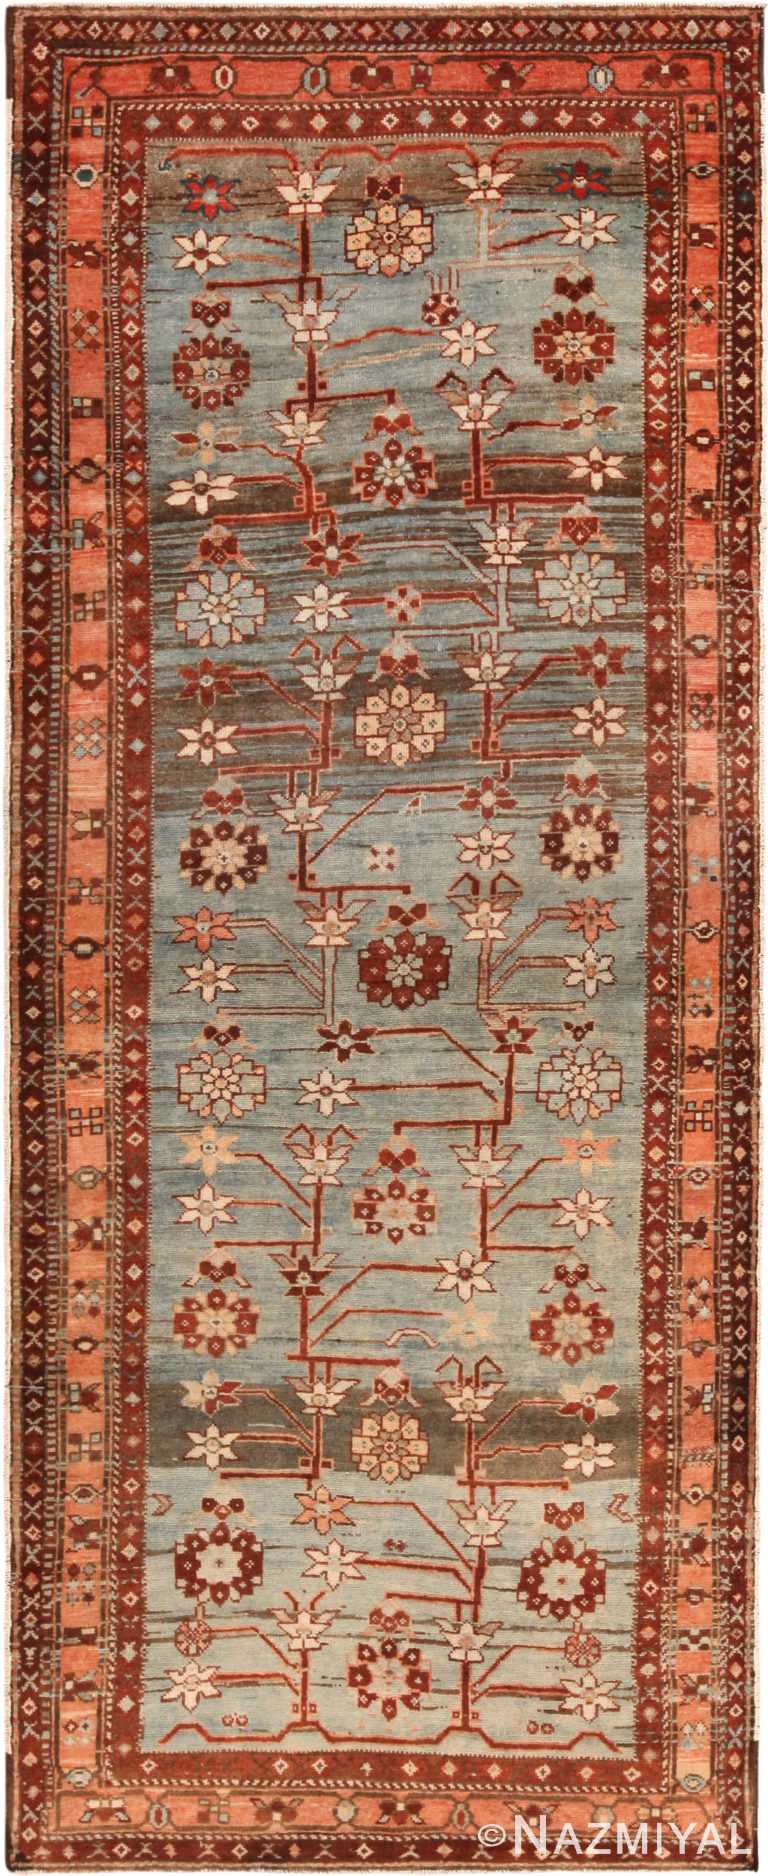 Antique Persian Malayer Runner Rug 72149 by Nazmiyal Antique Rugs